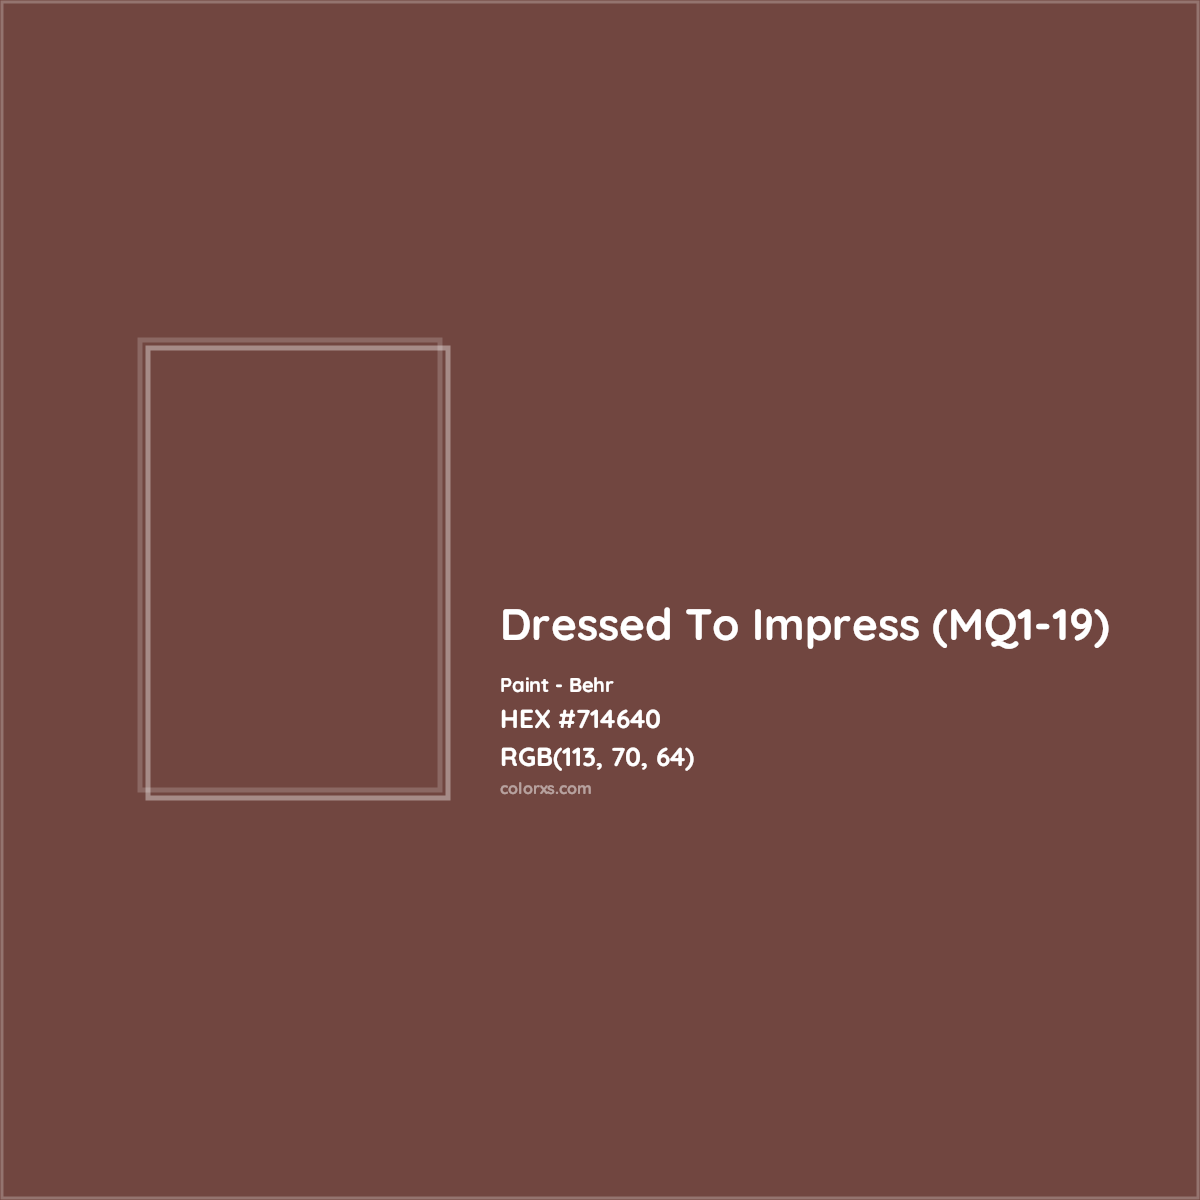 HEX #714640 Dressed To Impress (MQ1-19) Paint Behr - Color Code